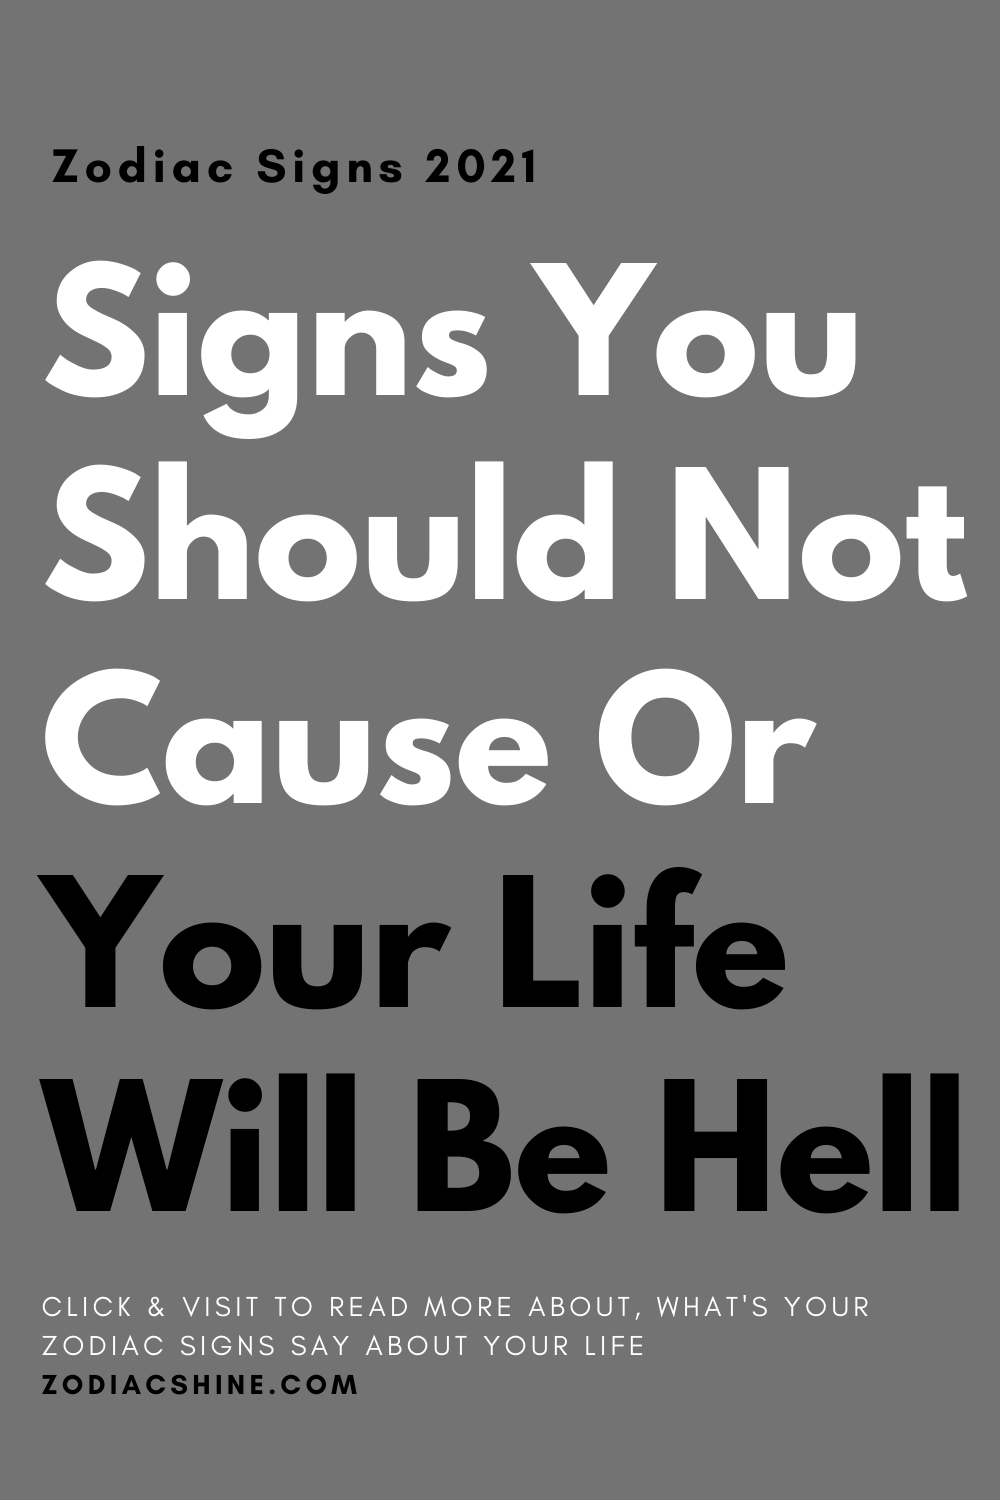 Signs You Should Not Cause Or Your Life Will Be Hell